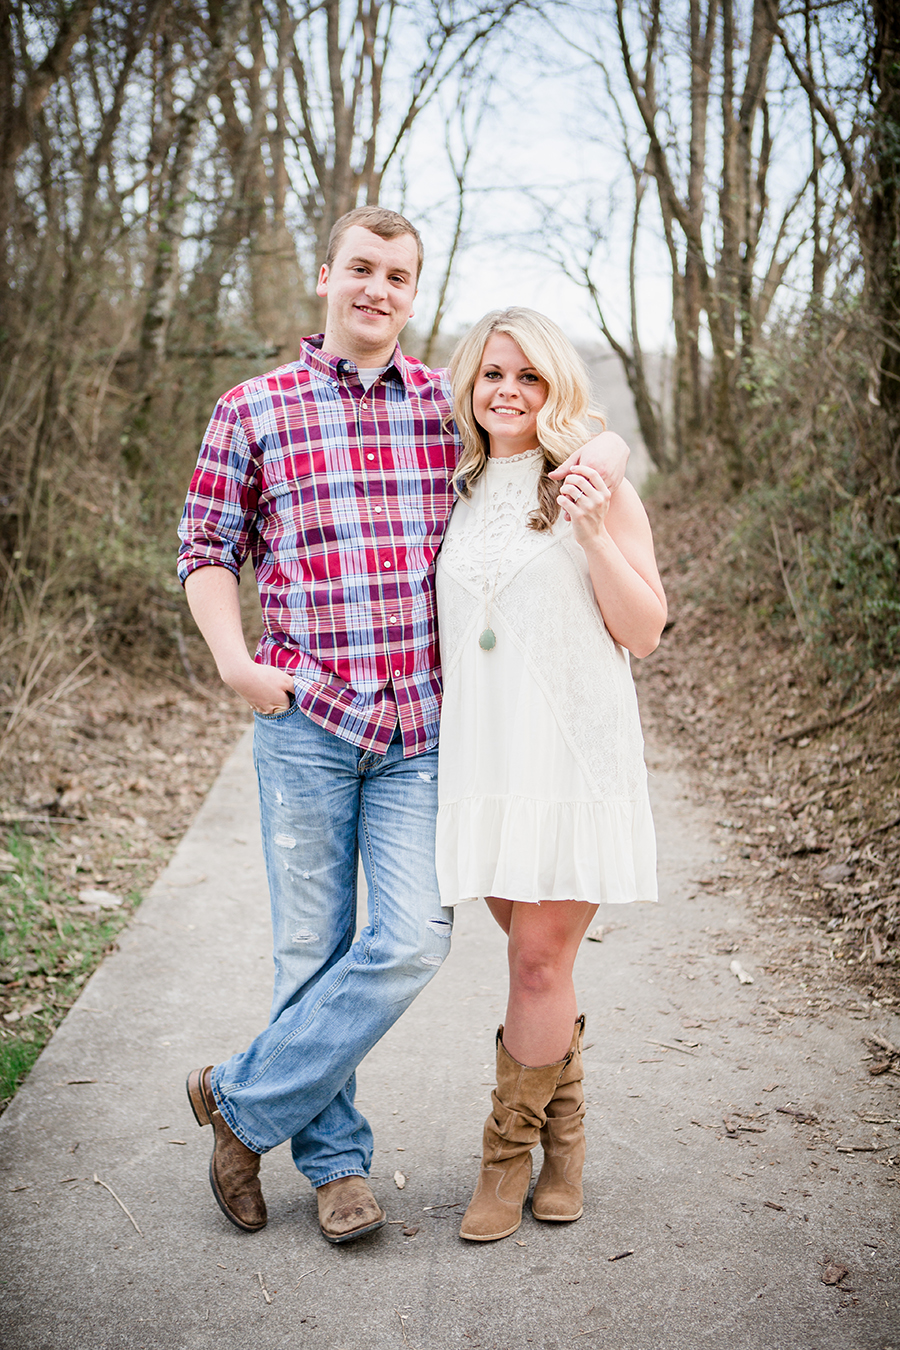 Arm around her shoulders engagement photo by Knoxville Wedding Photographer, Amanda May Photos.